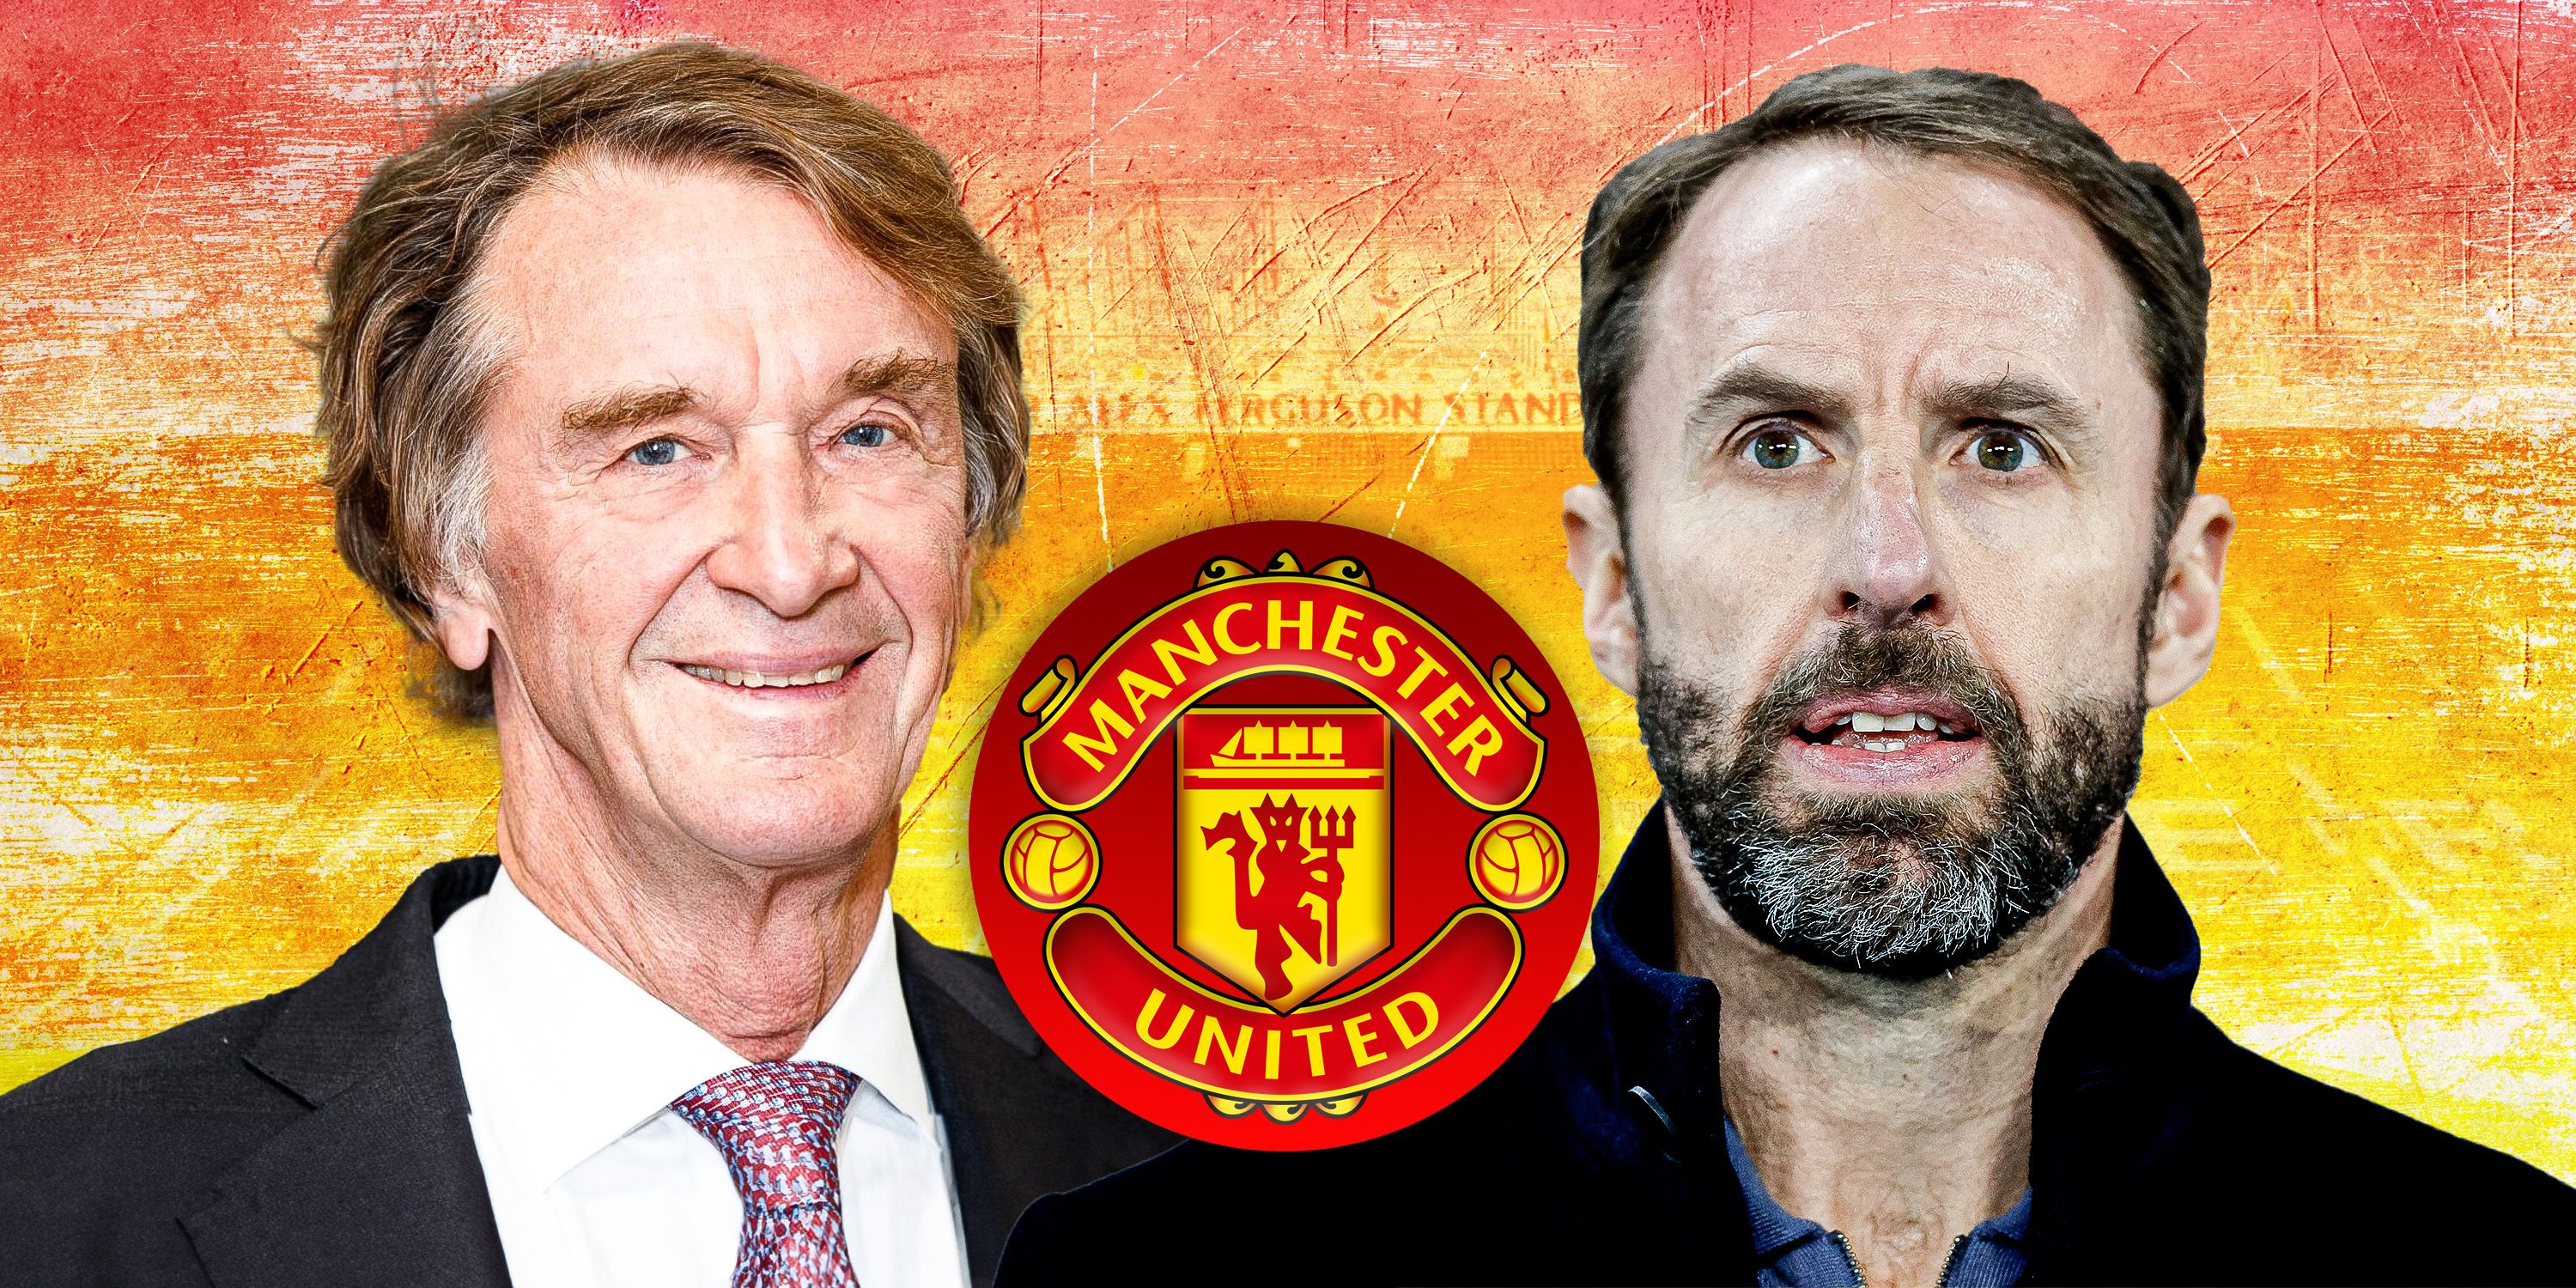 Manchester United co-owner Sir Jim Ratcliffe and England boss Gareth Southgate watching on